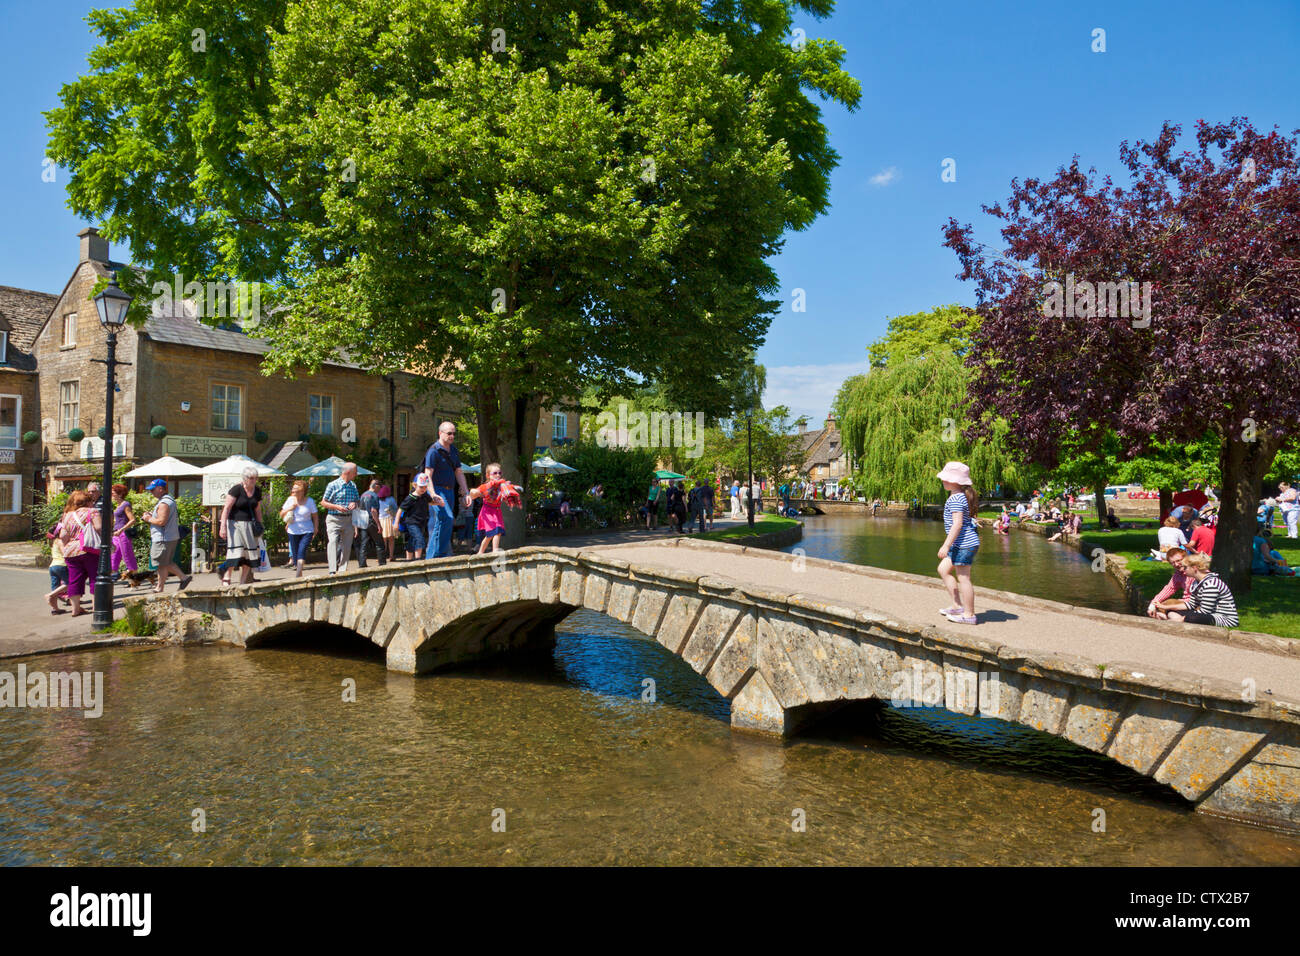 Cotswold village of Bourton on the water with Bridge over the River Windrush in Bourton on the Water Cotswolds Gloucestershire England UK GB Europe Stock Photo